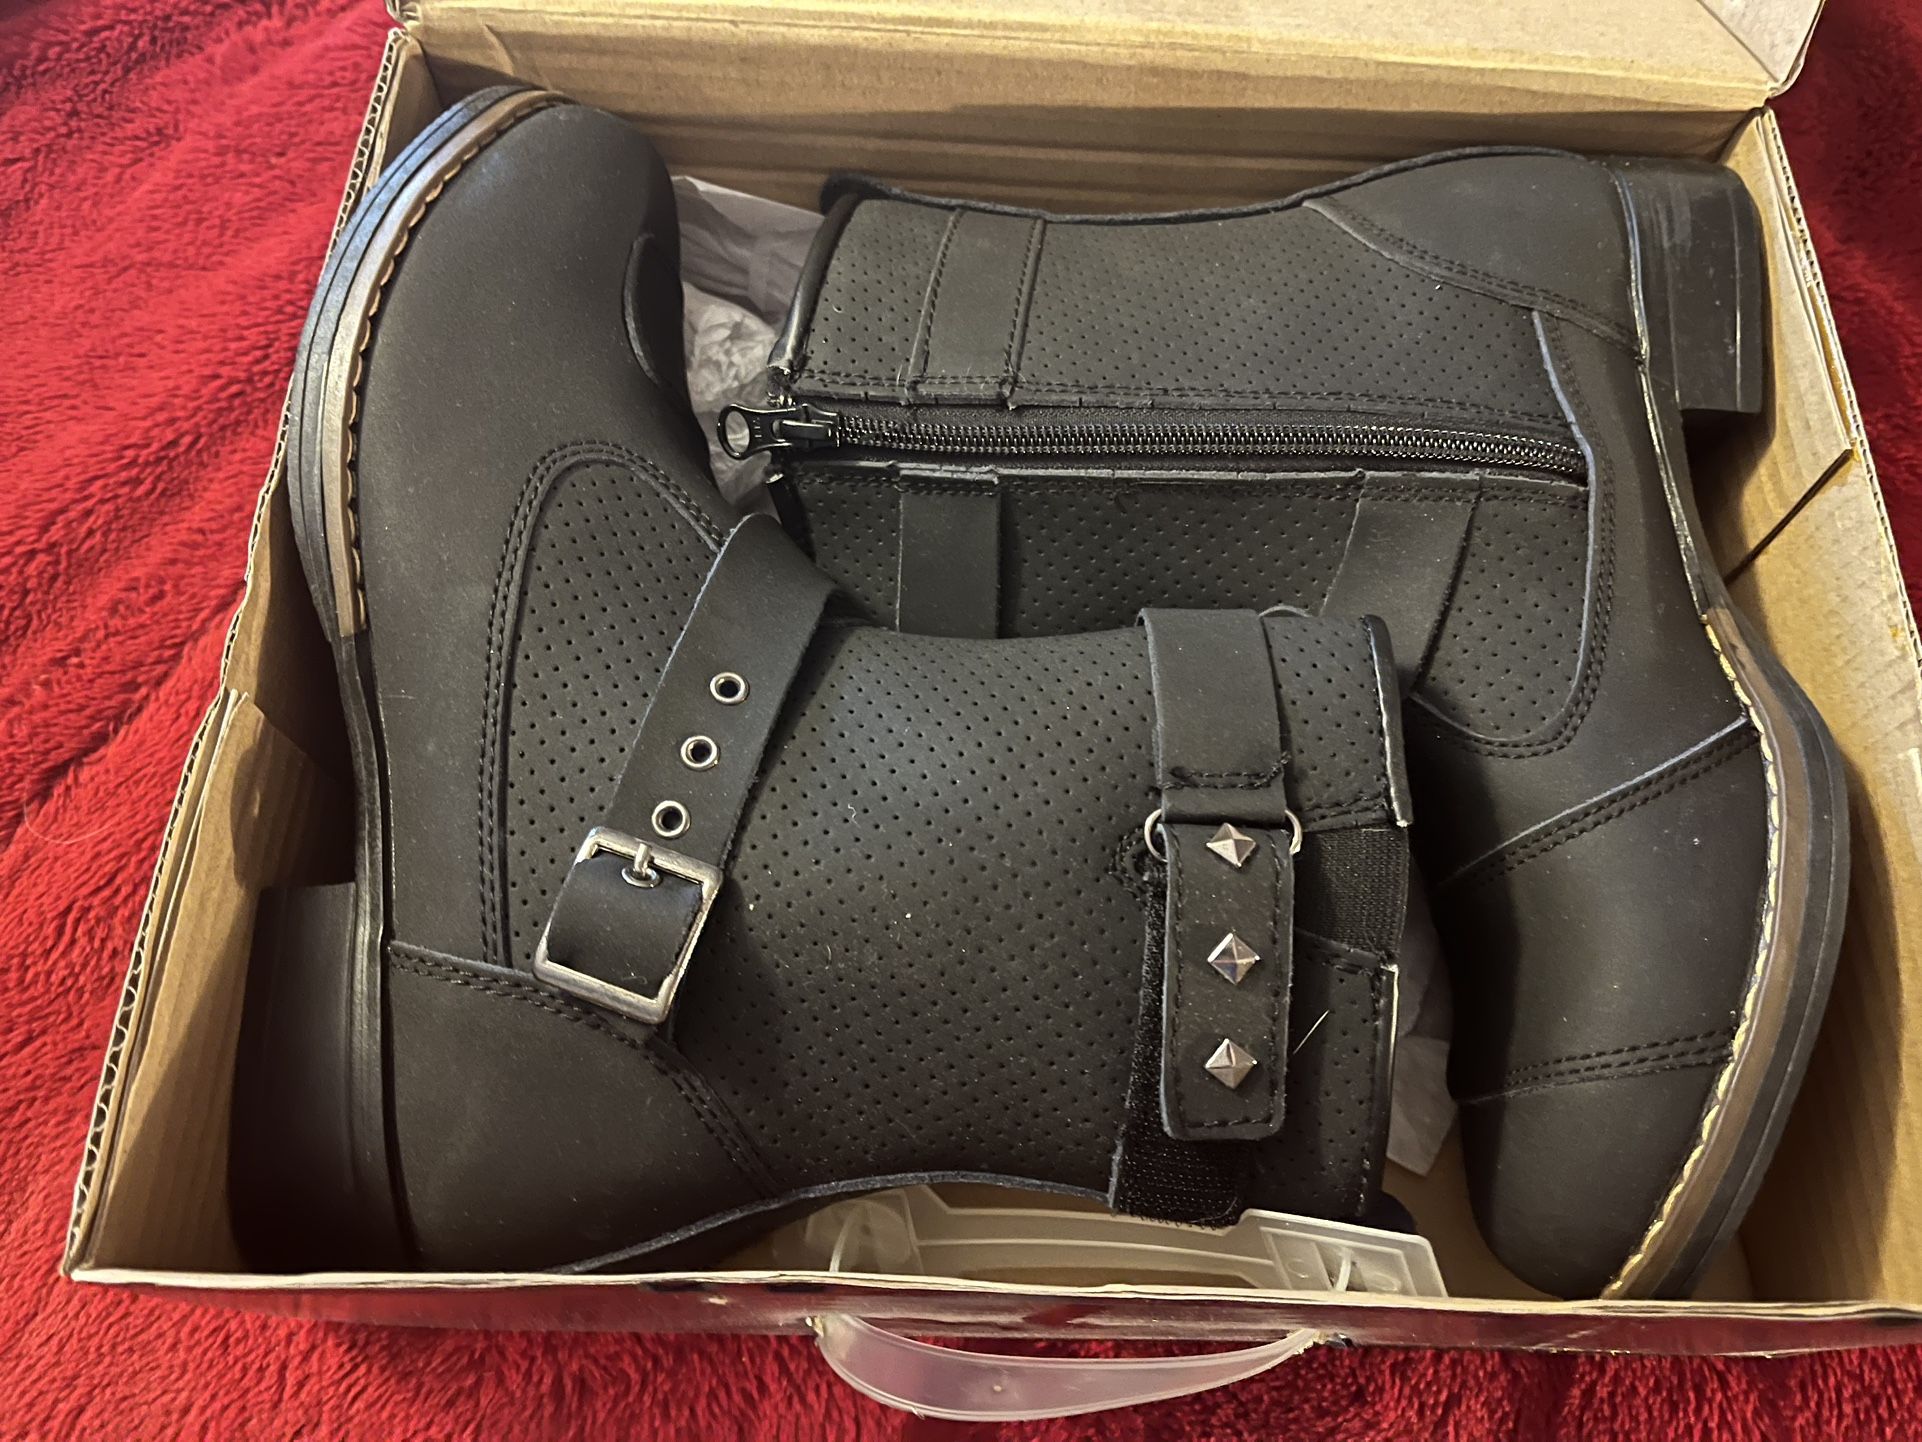 Women’s Moto Boots New In Box Size 9